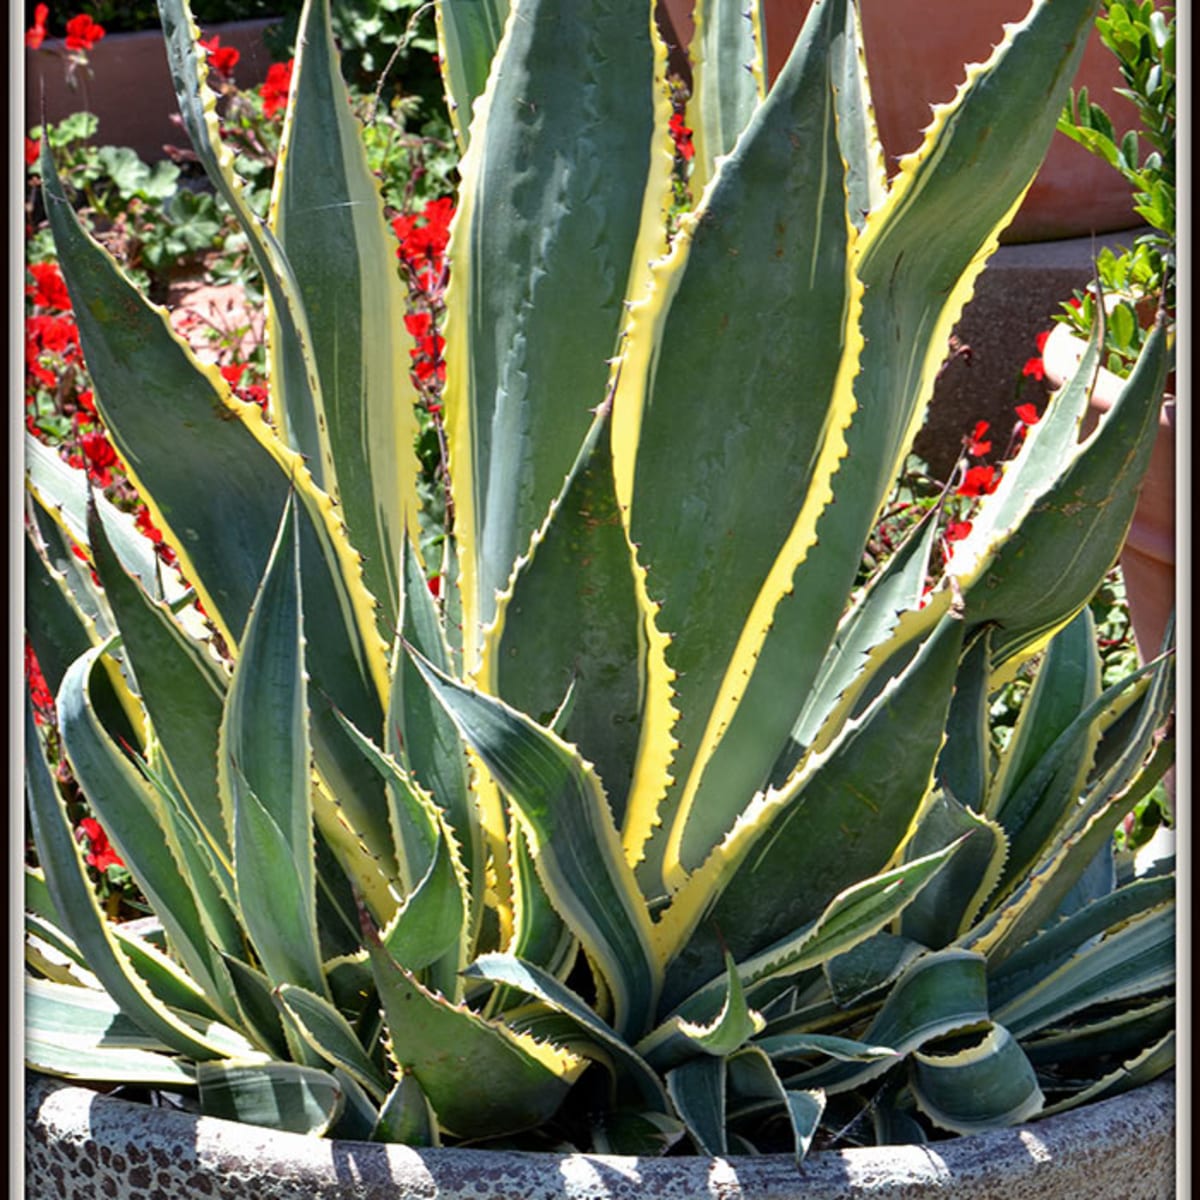 agaves in containers - horticulture